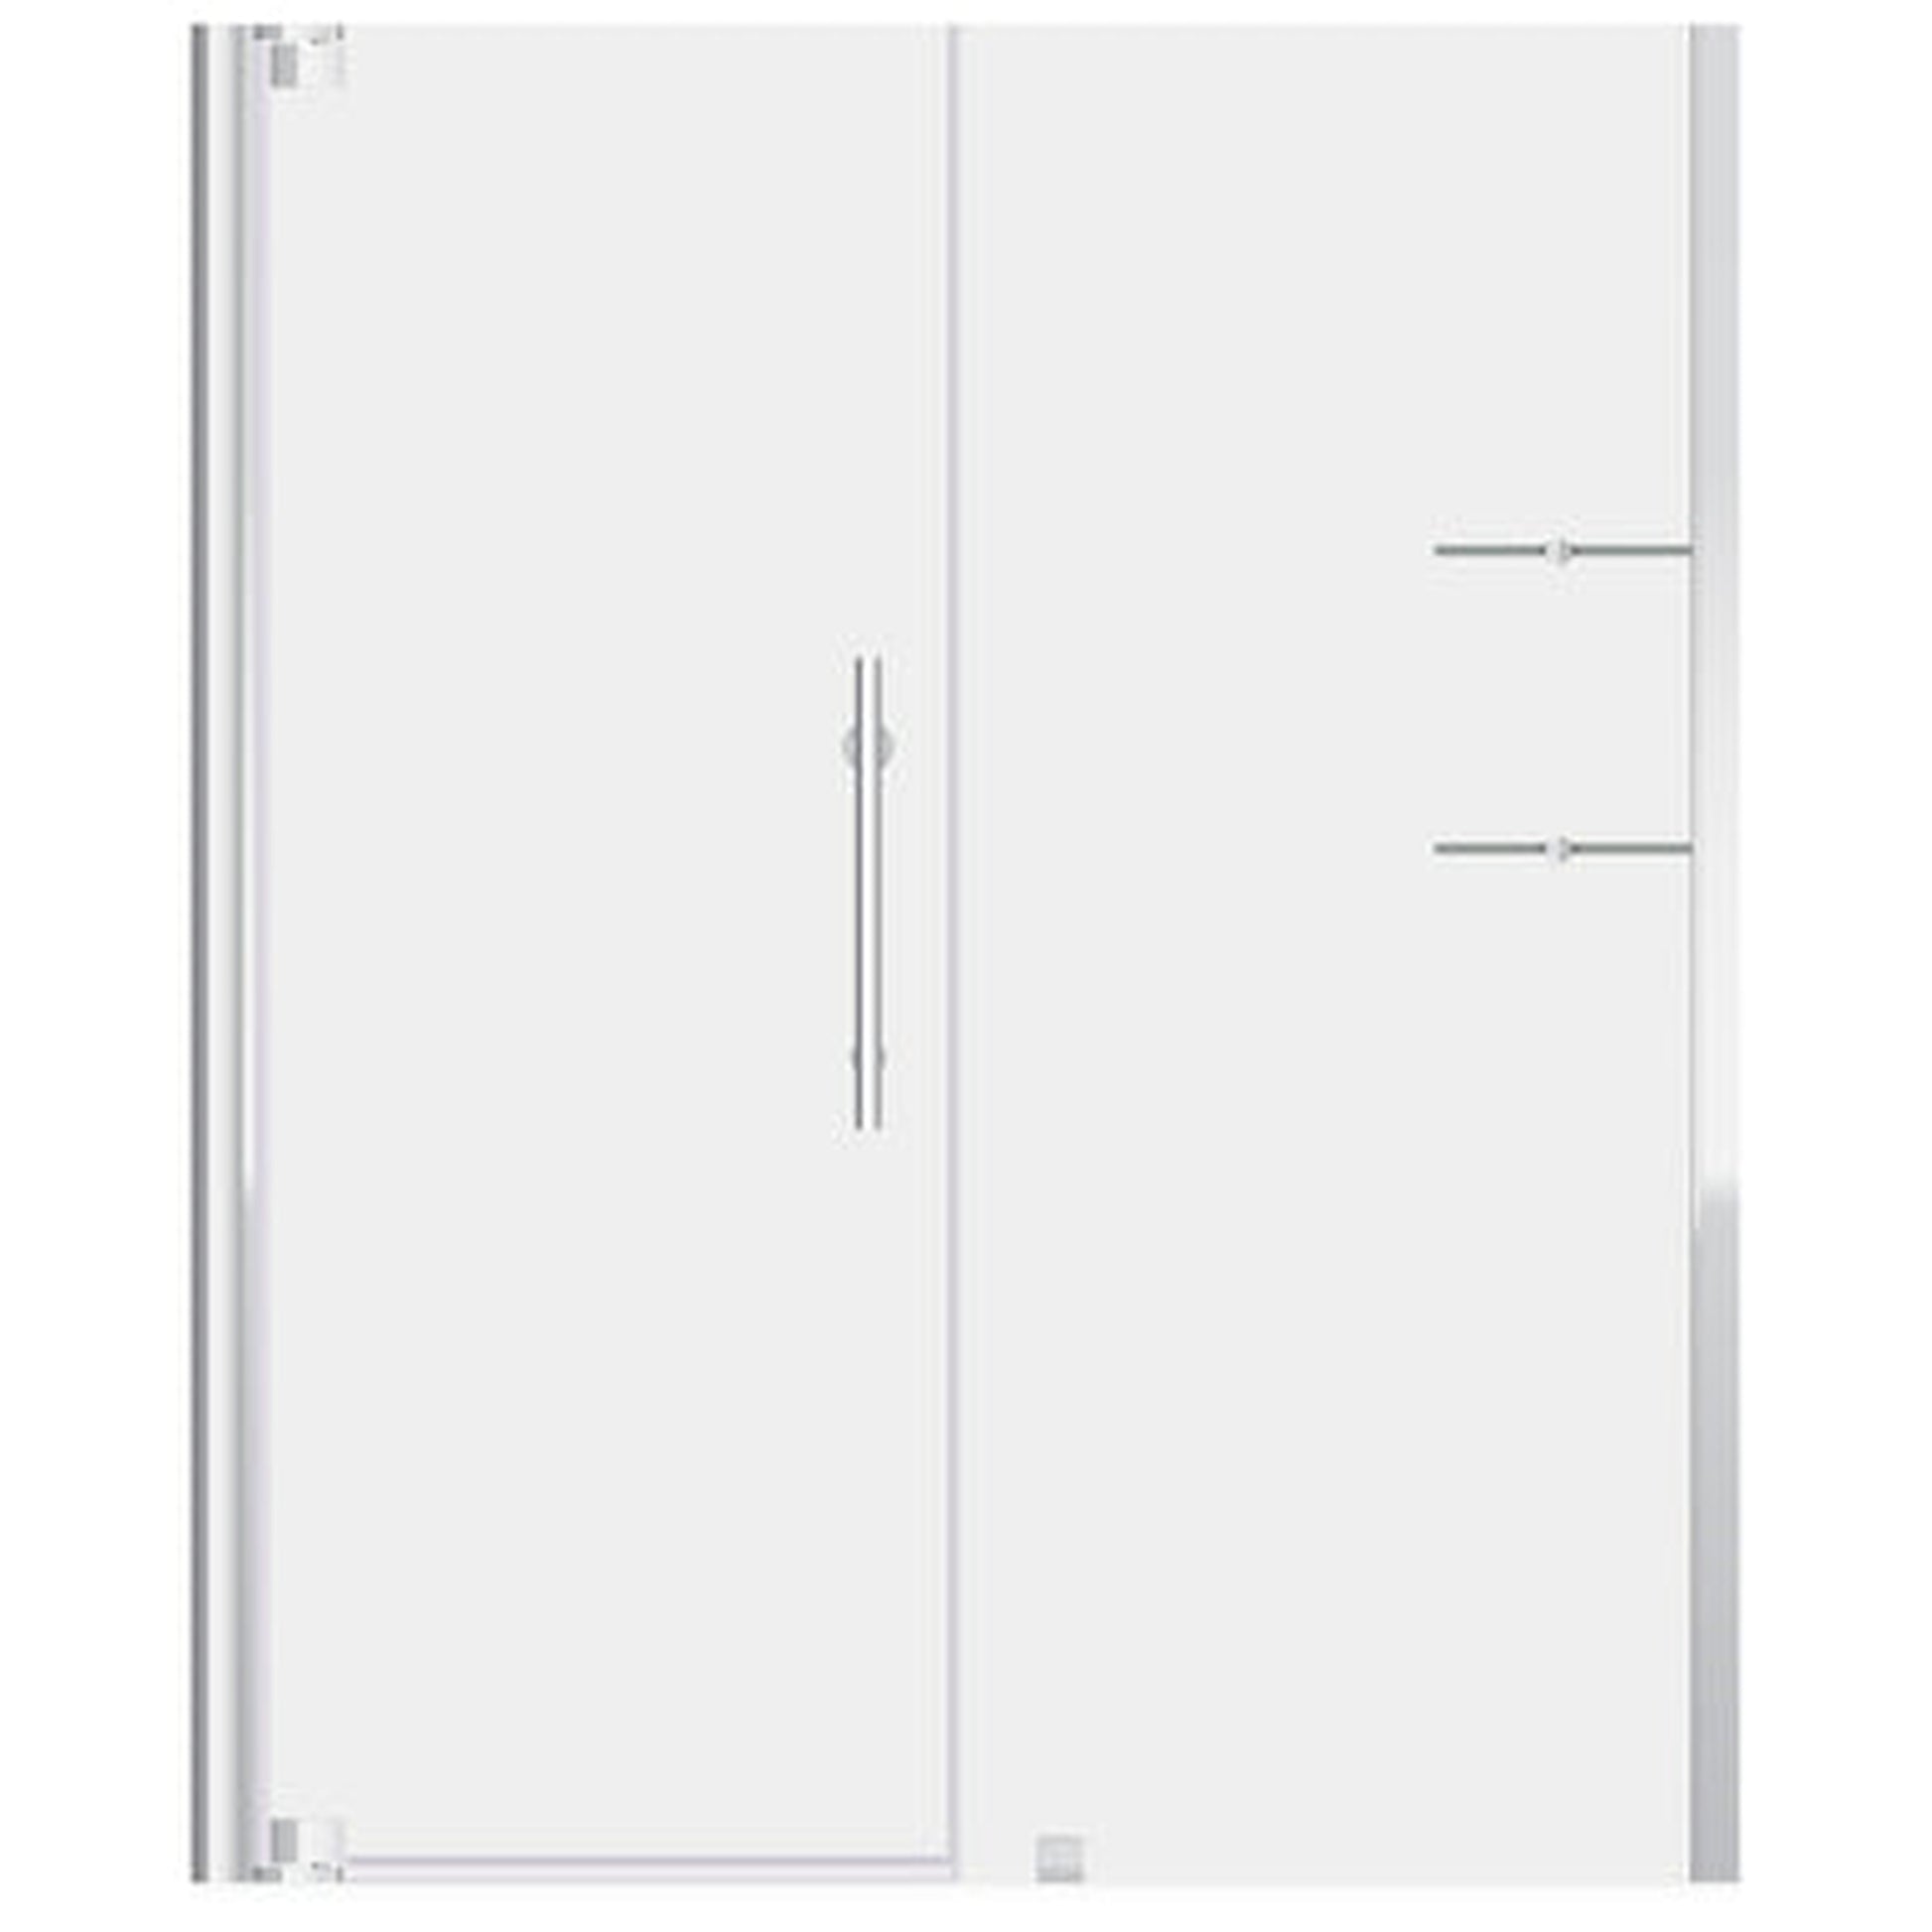 LessCare Ultra-G 63-65" x 72" Chrome Swing-Out Shower Door with 34" Side Panel